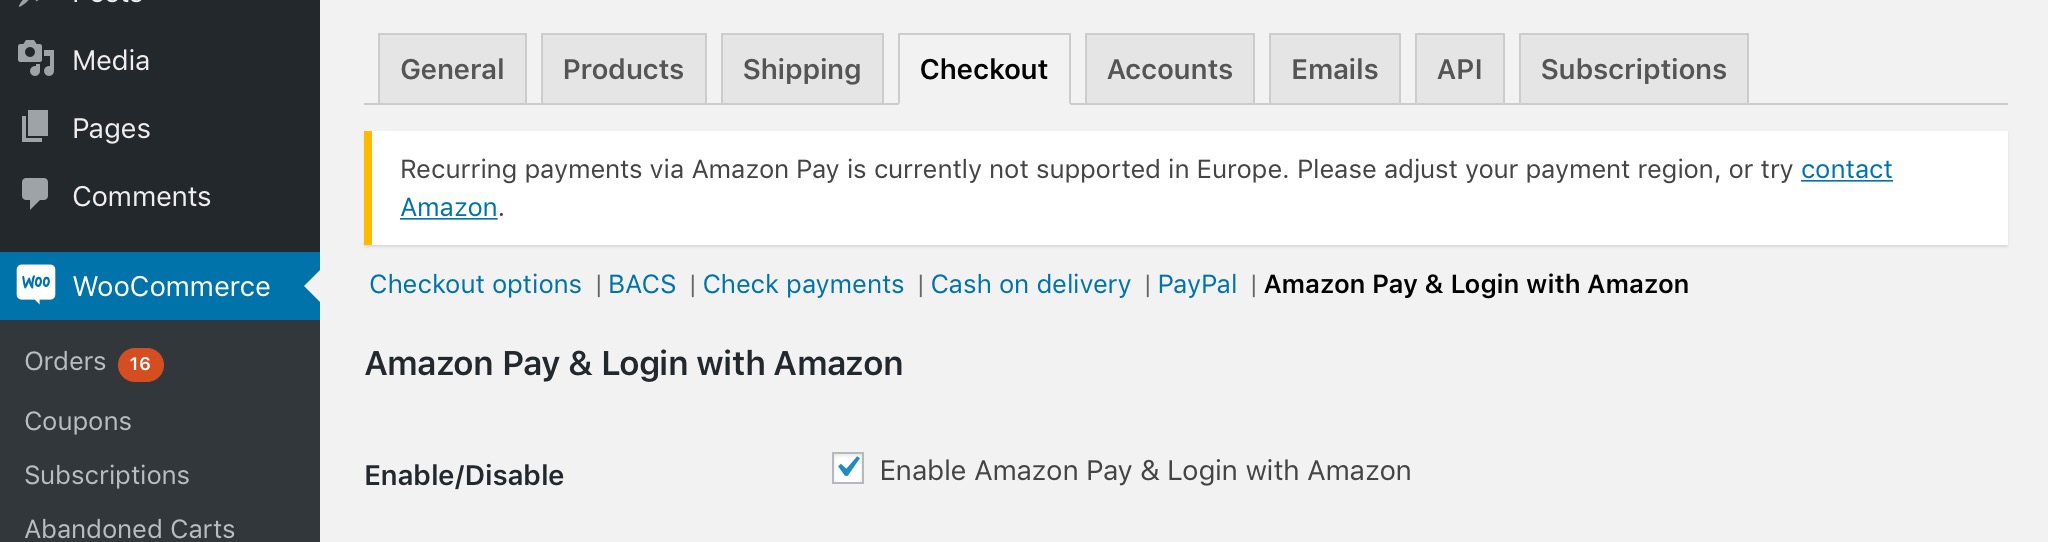 Allowing customers to choose delivery details on Amazon Checkout page